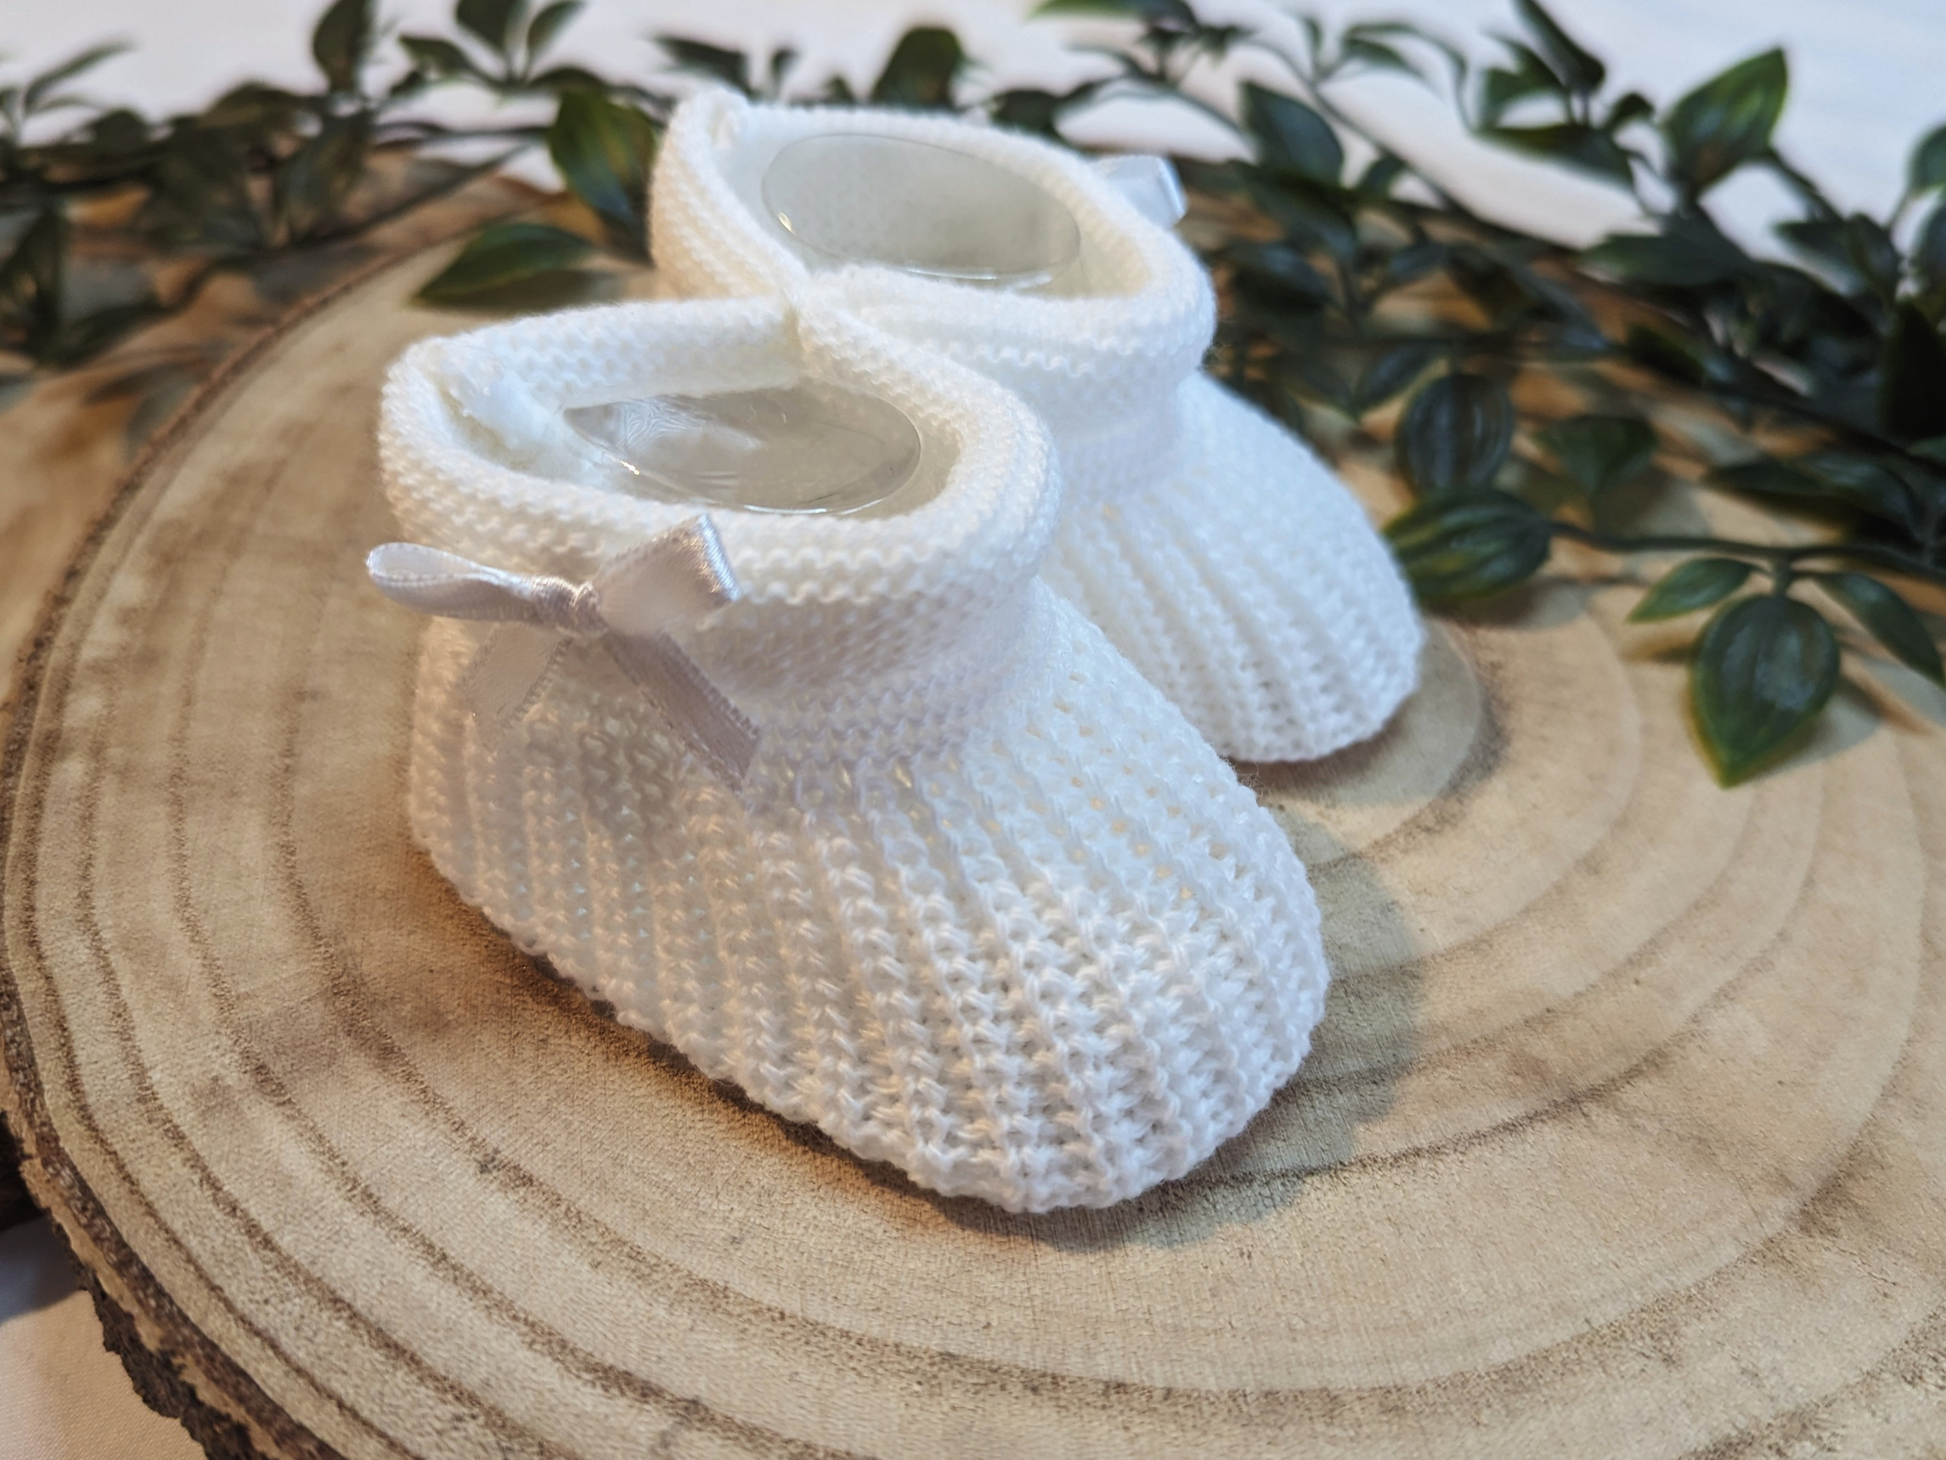 Unisex Newborn Clothes - Baby booties with a white coloured knitted design, featuring a small bow on the side. (Side Angle)